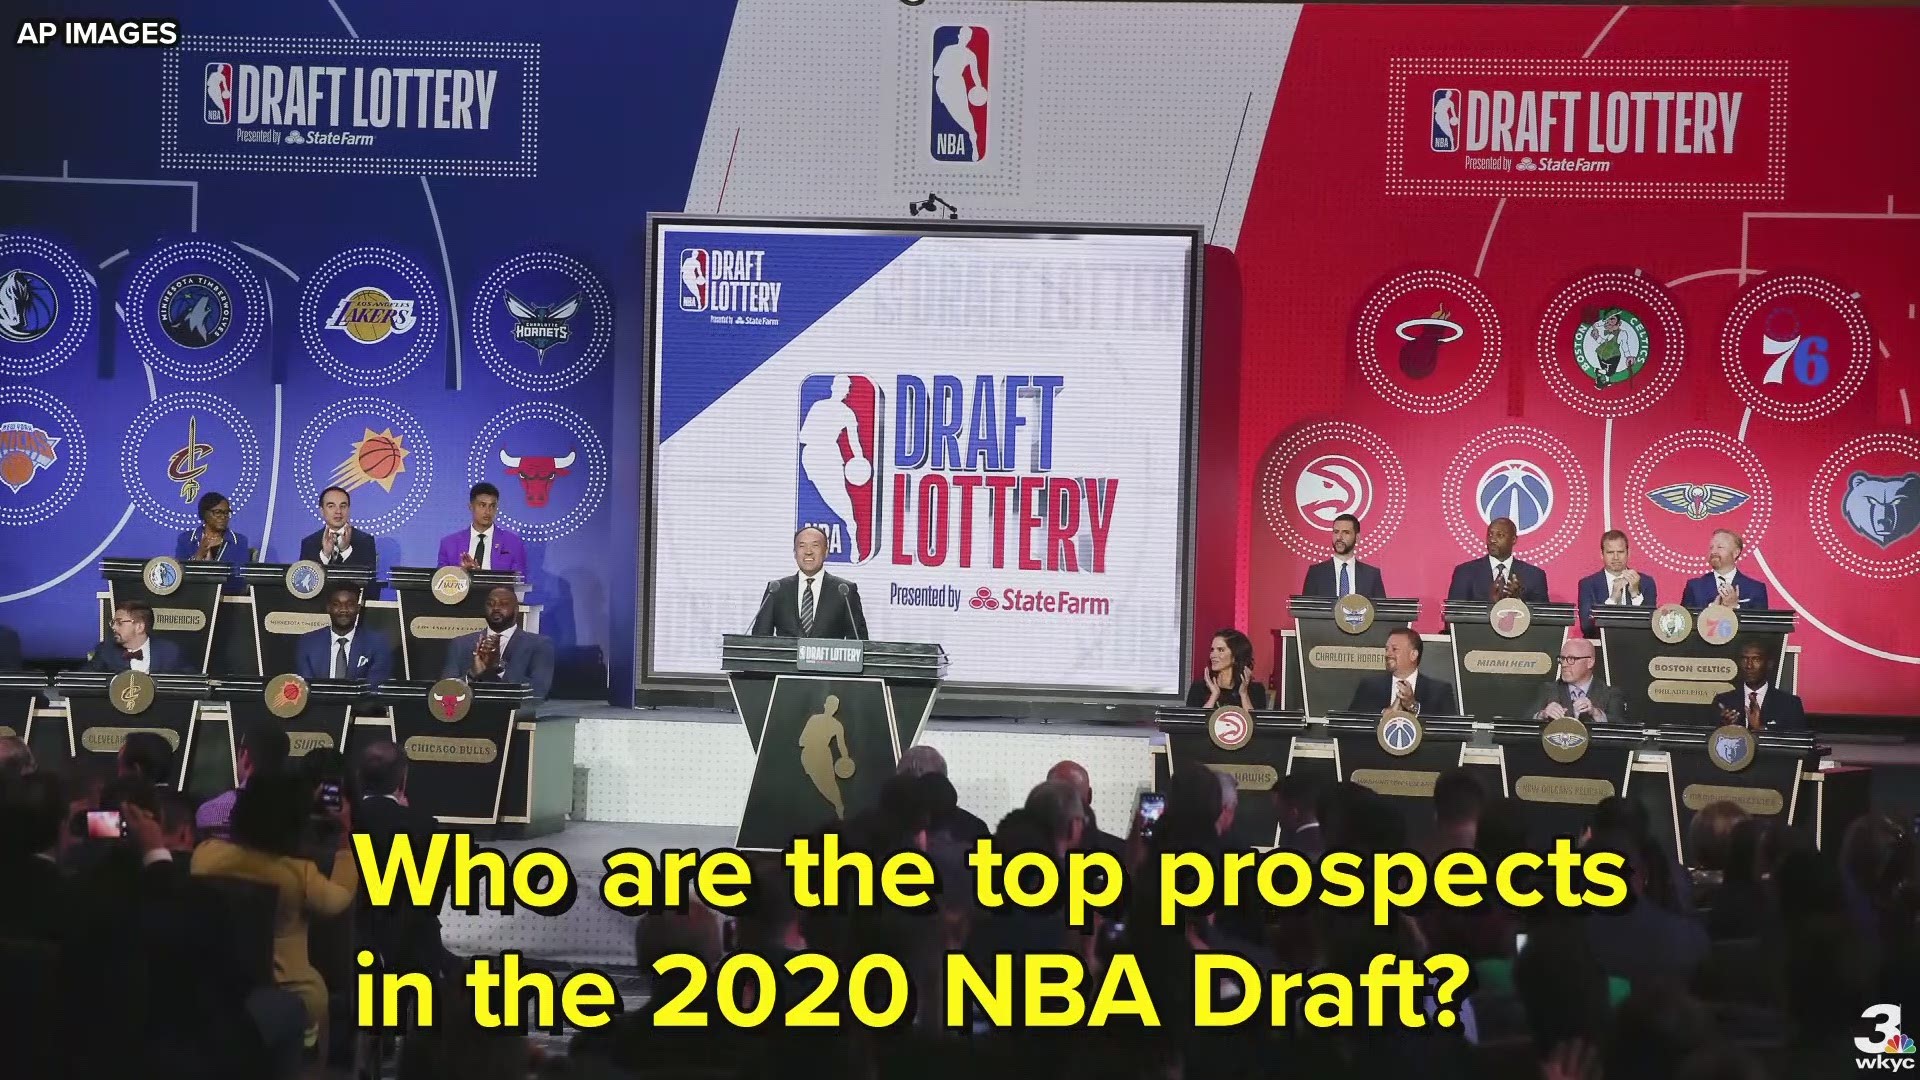 Anthony Edwards, R.J. Hampton and James Wiseman are some names to know when it comes to the 2020 NBA Draft.